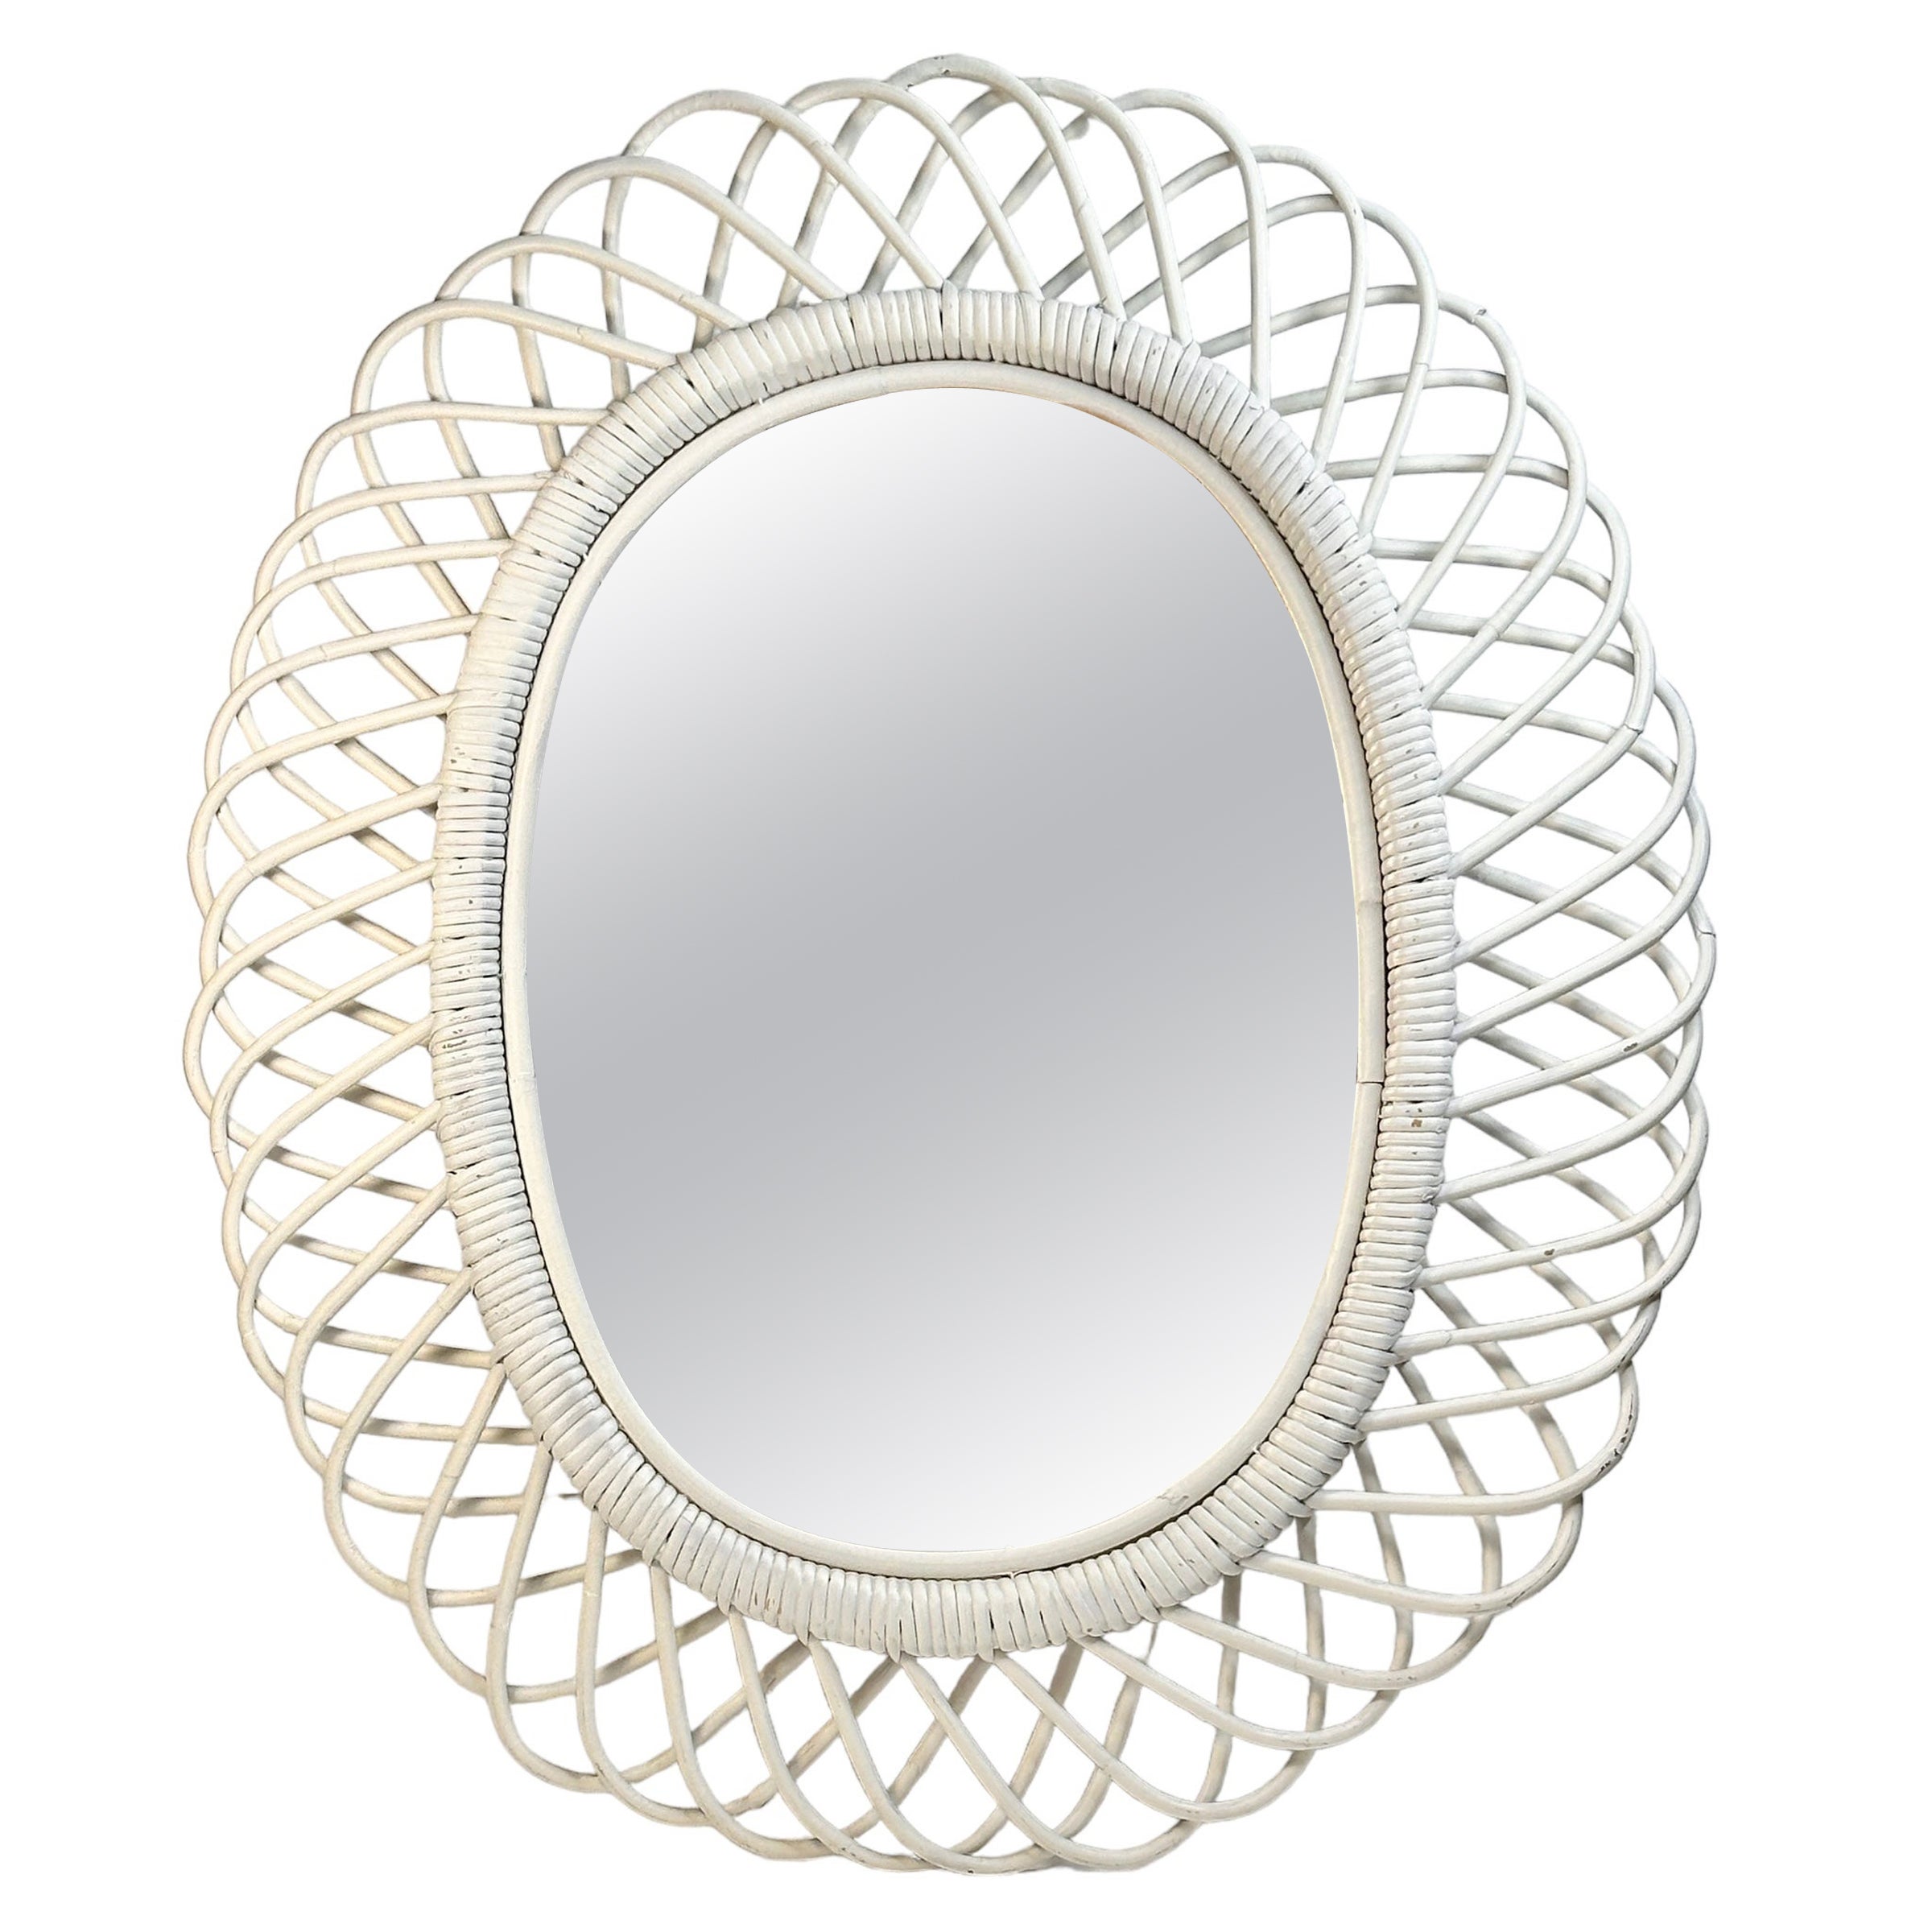 Mid-Century Modern Handcrafted Oval Rattan Mirror, Italy, 1960s Albini Style For Sale